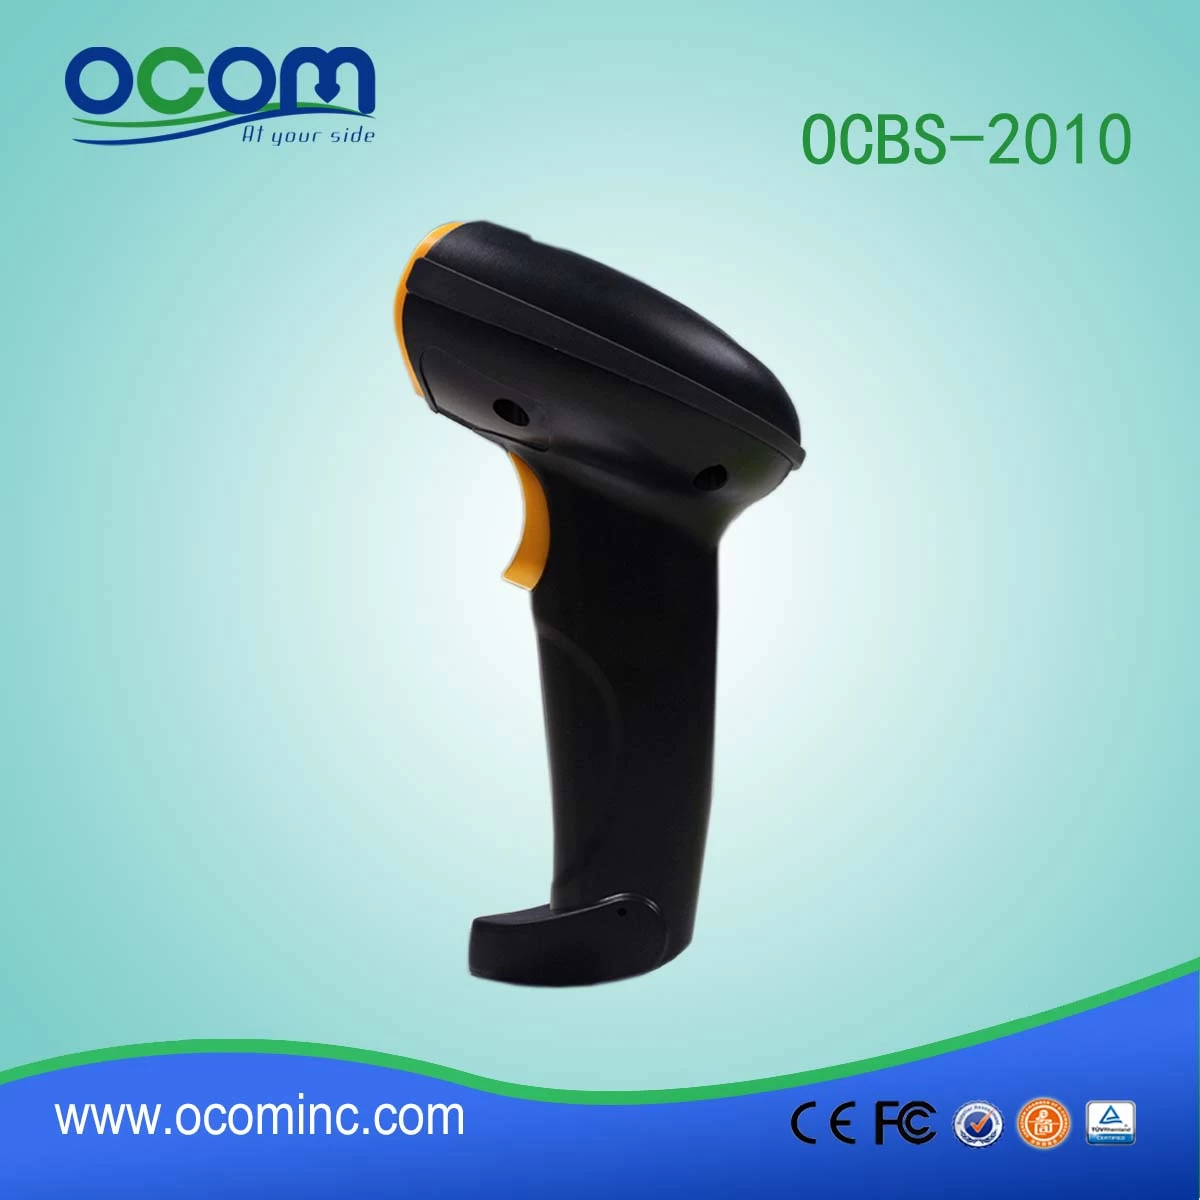 OCBS-2010: Pos QR Code Scanner Similiar With Honeywell Barcode Scanner